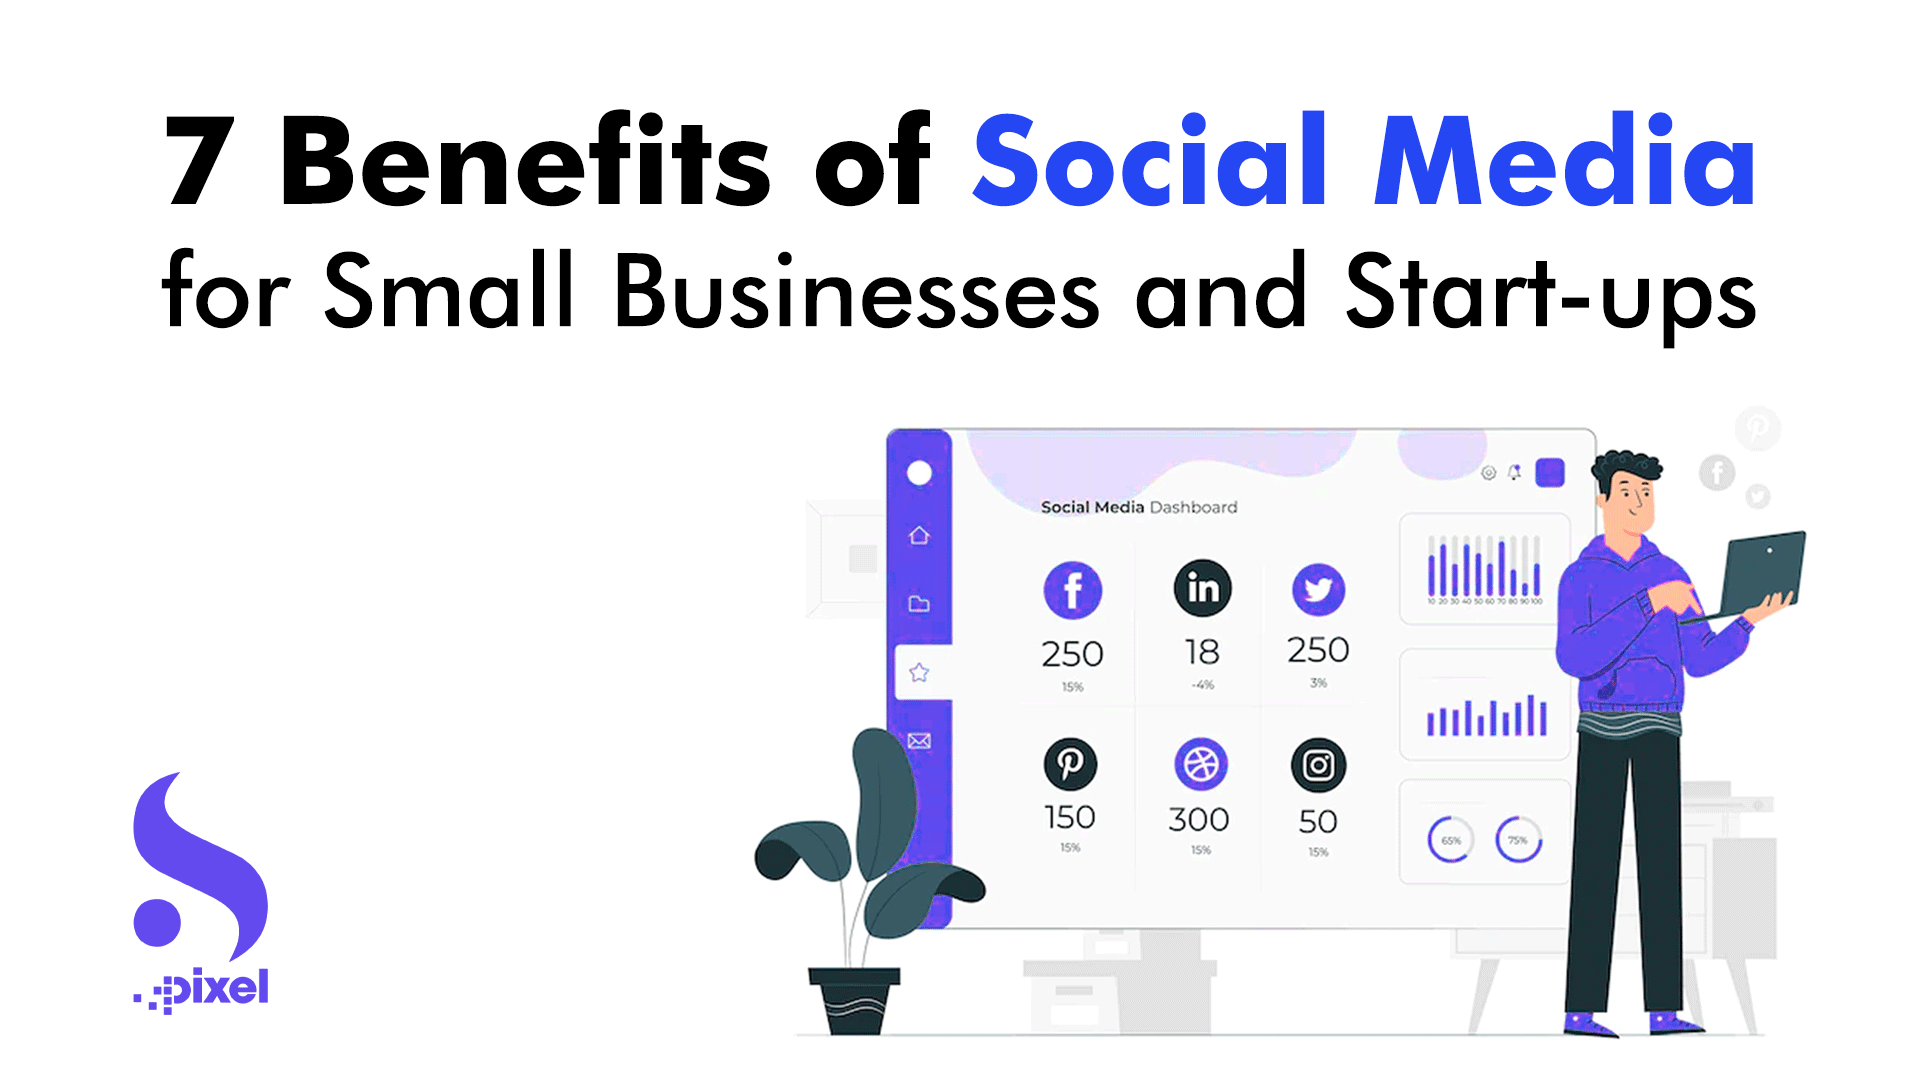 Spixel-7-Benefits-of-Social-Media-for-Small-Businesses-and-Startups